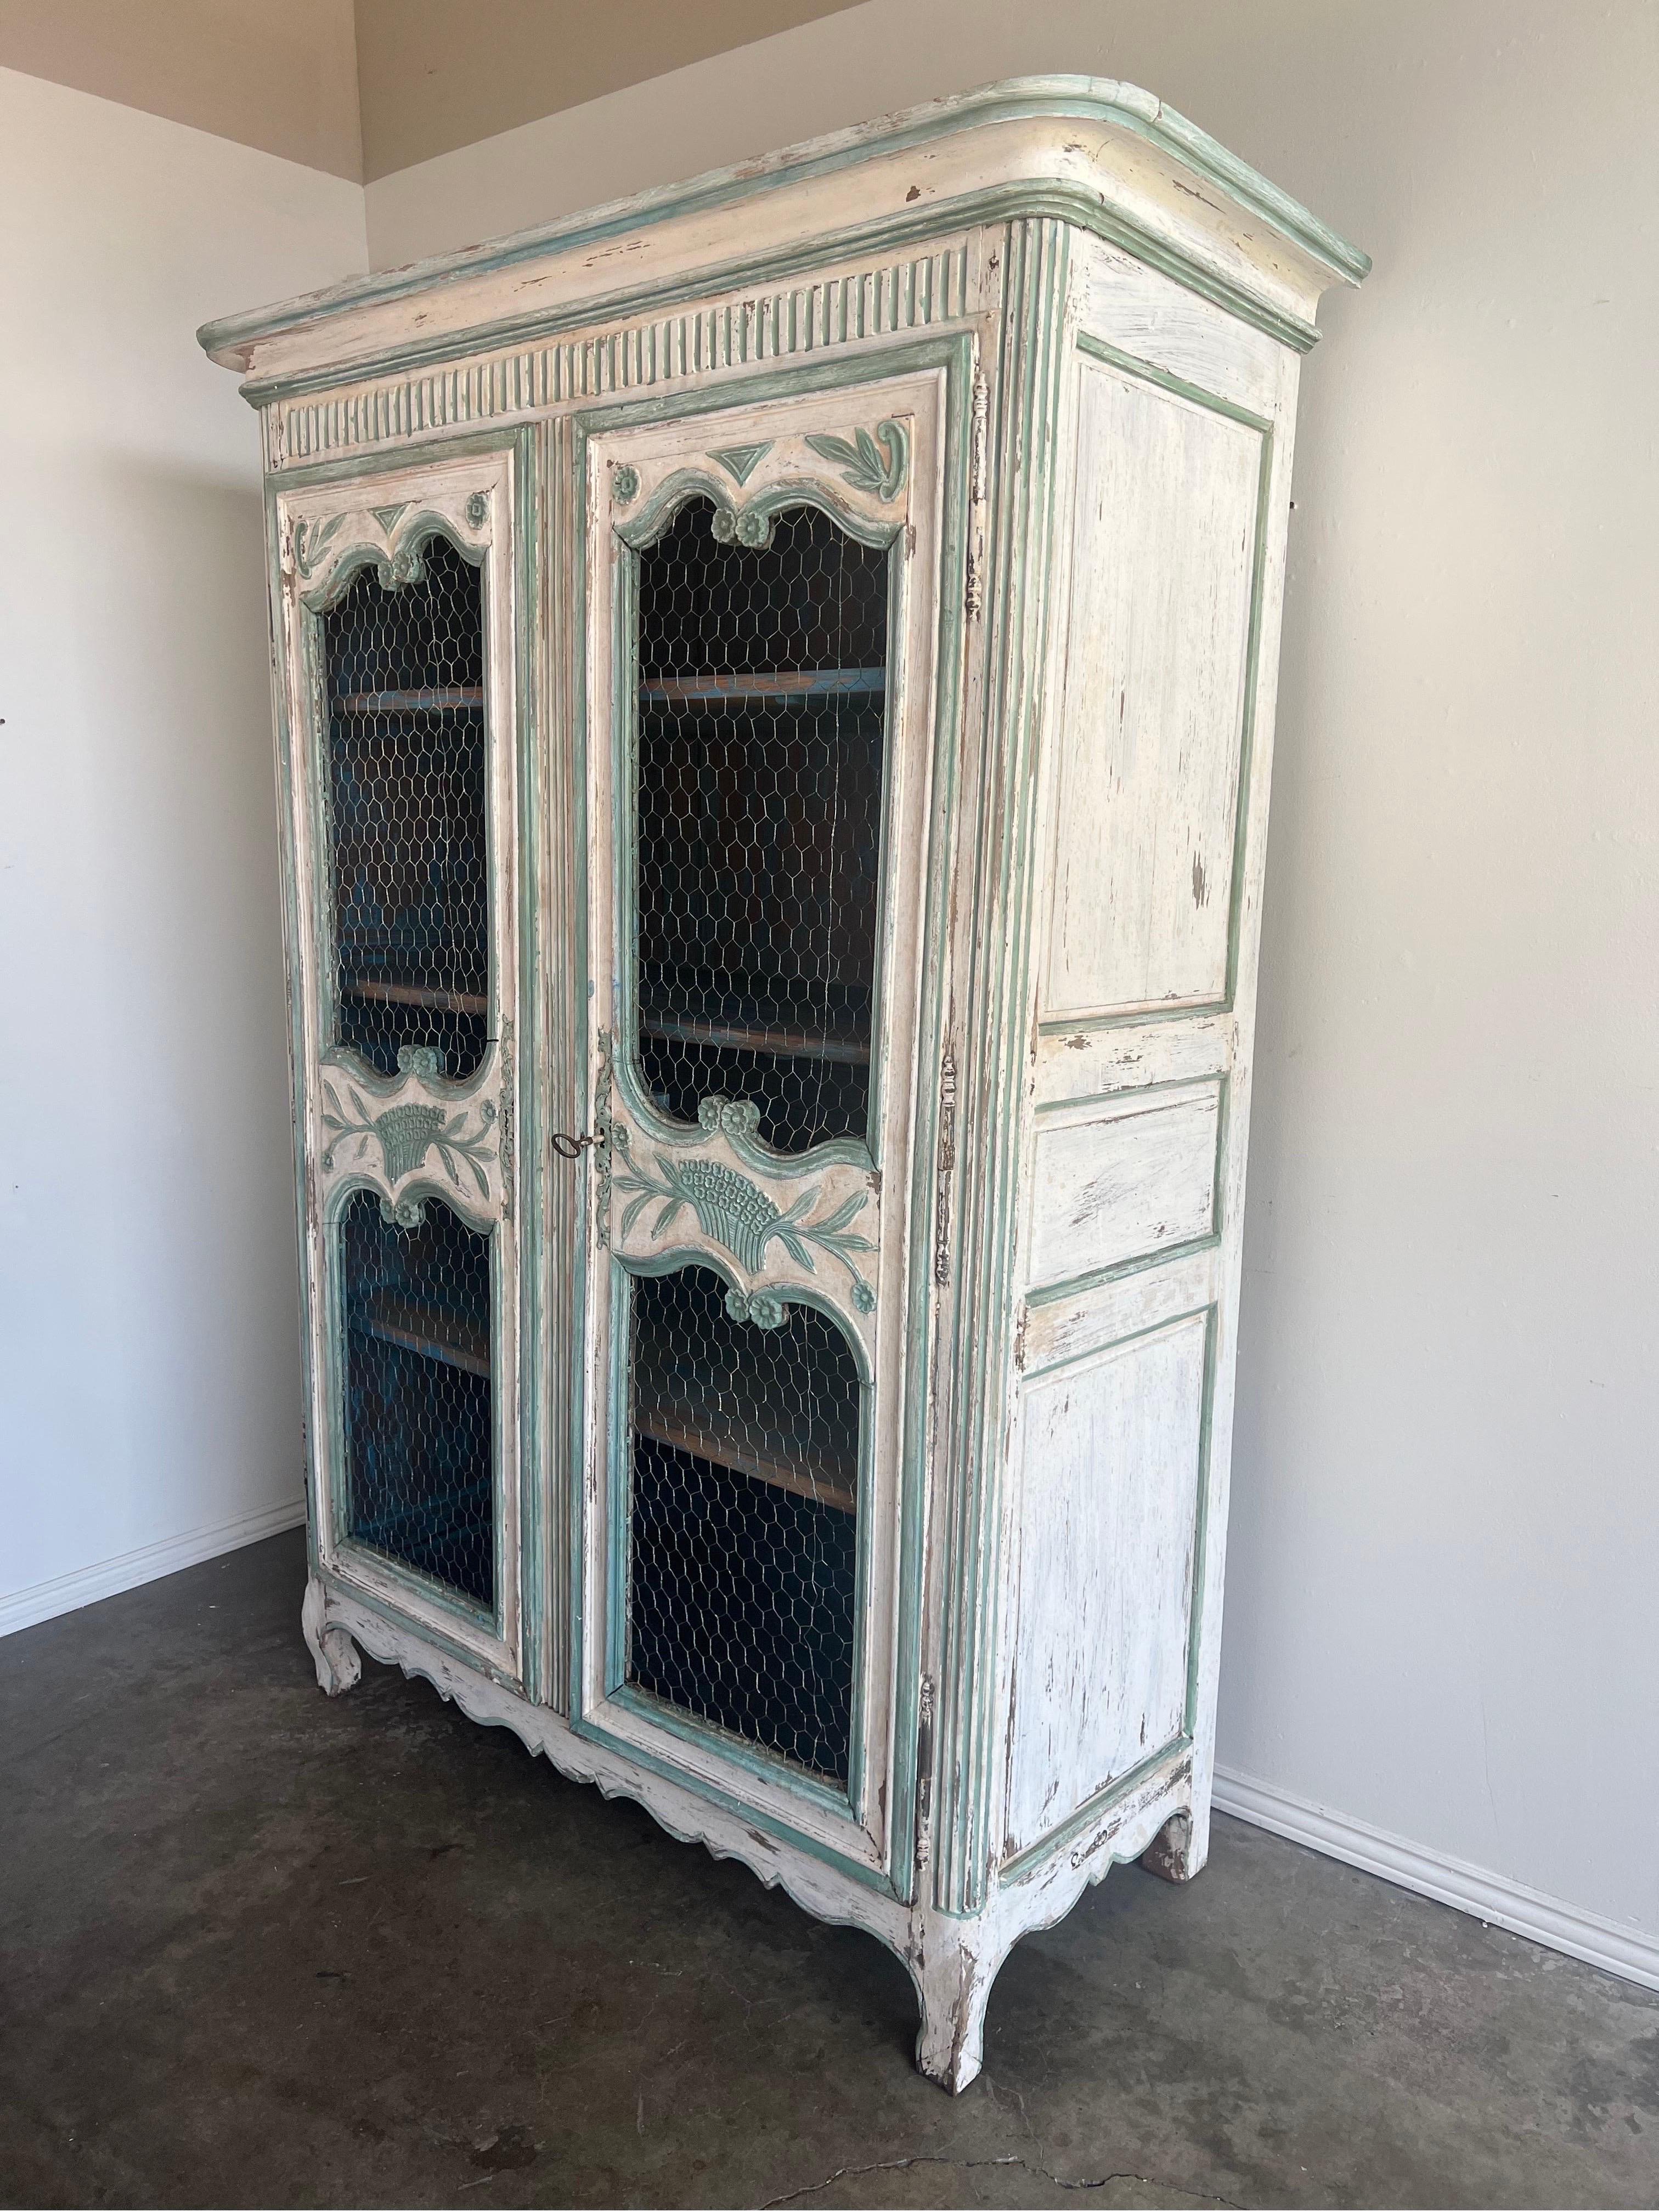 19th C. French painted Armoire w/ chicken wire.  The armoire is painted in shades of aqua marine and antique white.  You can see the wood underneath as well. 
There are two doors that hide three shelves - plenty of storage.  Original brass hardware.